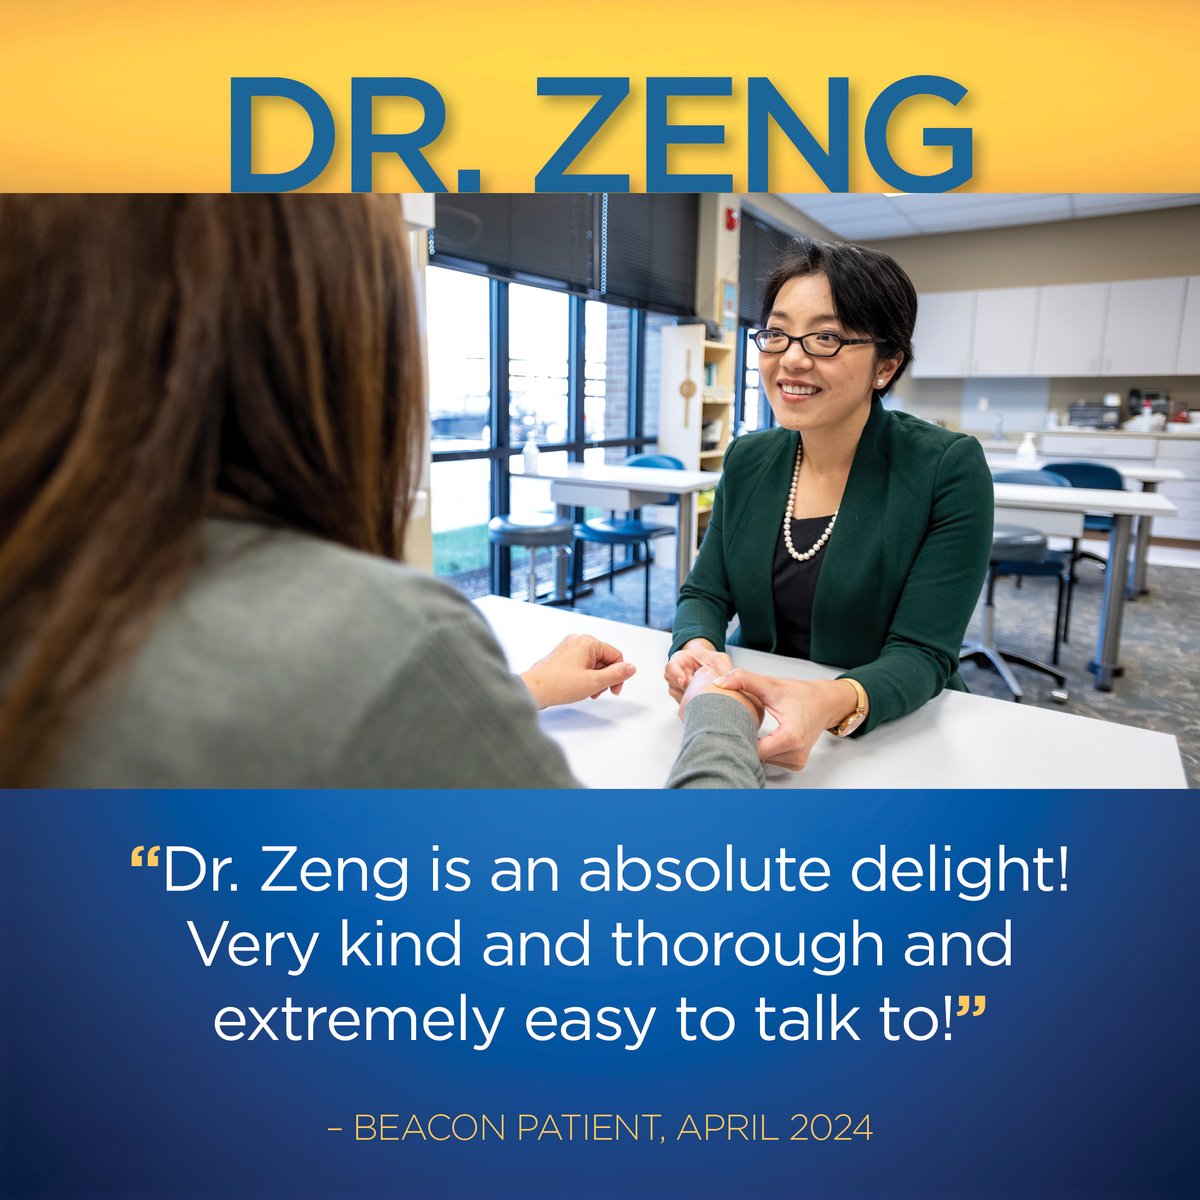 In medical school, Beacon's Dr. Wenjing Zeng discovered a fascination for the intricacy of the hand. A graduate of Yale, Dr. Zeng is a board-certified surgeon and sees patients for any injury involving the hand, wrist, or forearm. Schedule a visit at hubs.ly/Q02vHGrV0.